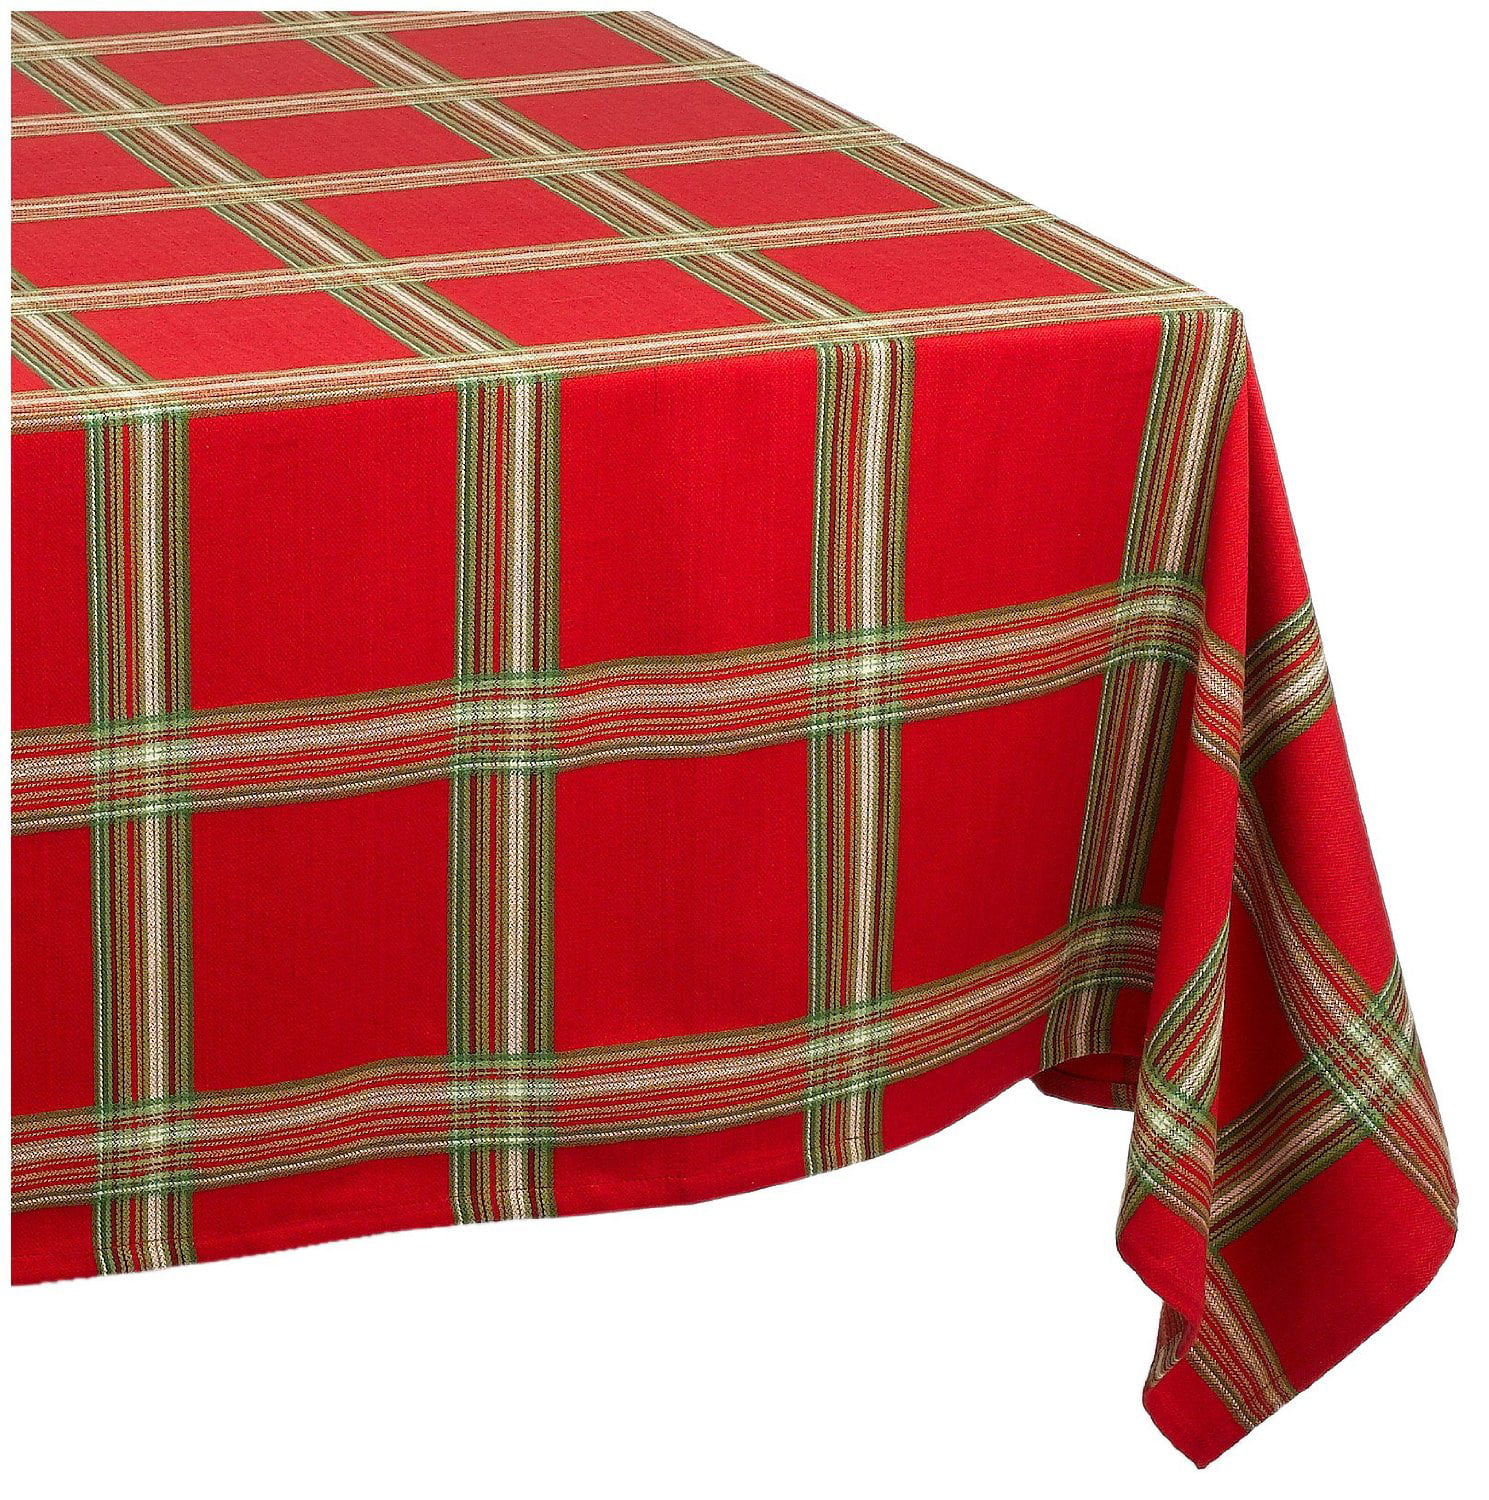 Tablecloth Lenox Holiday Gatherings Plaid 70 in Round 